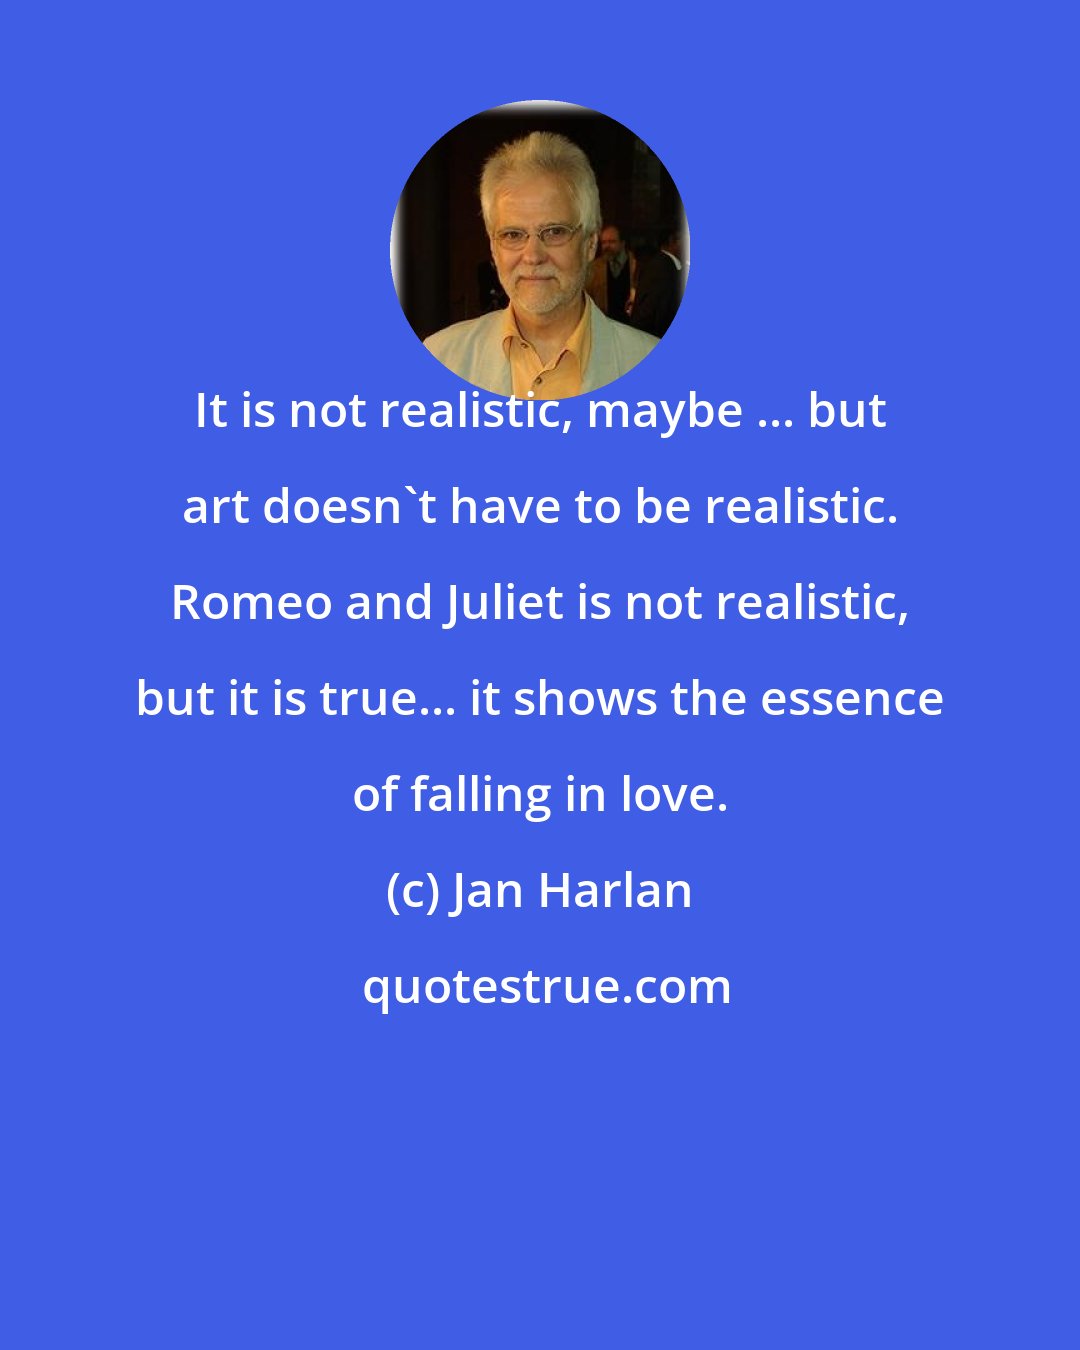 Jan Harlan: It is not realistic, maybe ... but art doesn't have to be realistic. Romeo and Juliet is not realistic, but it is true... it shows the essence of falling in love.